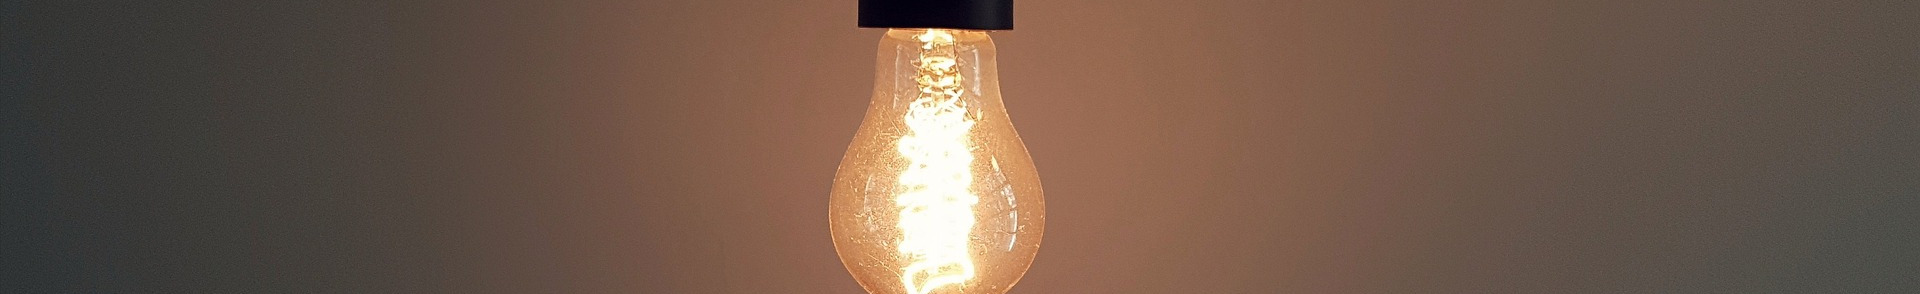 Light bulb hanging from the ceiling